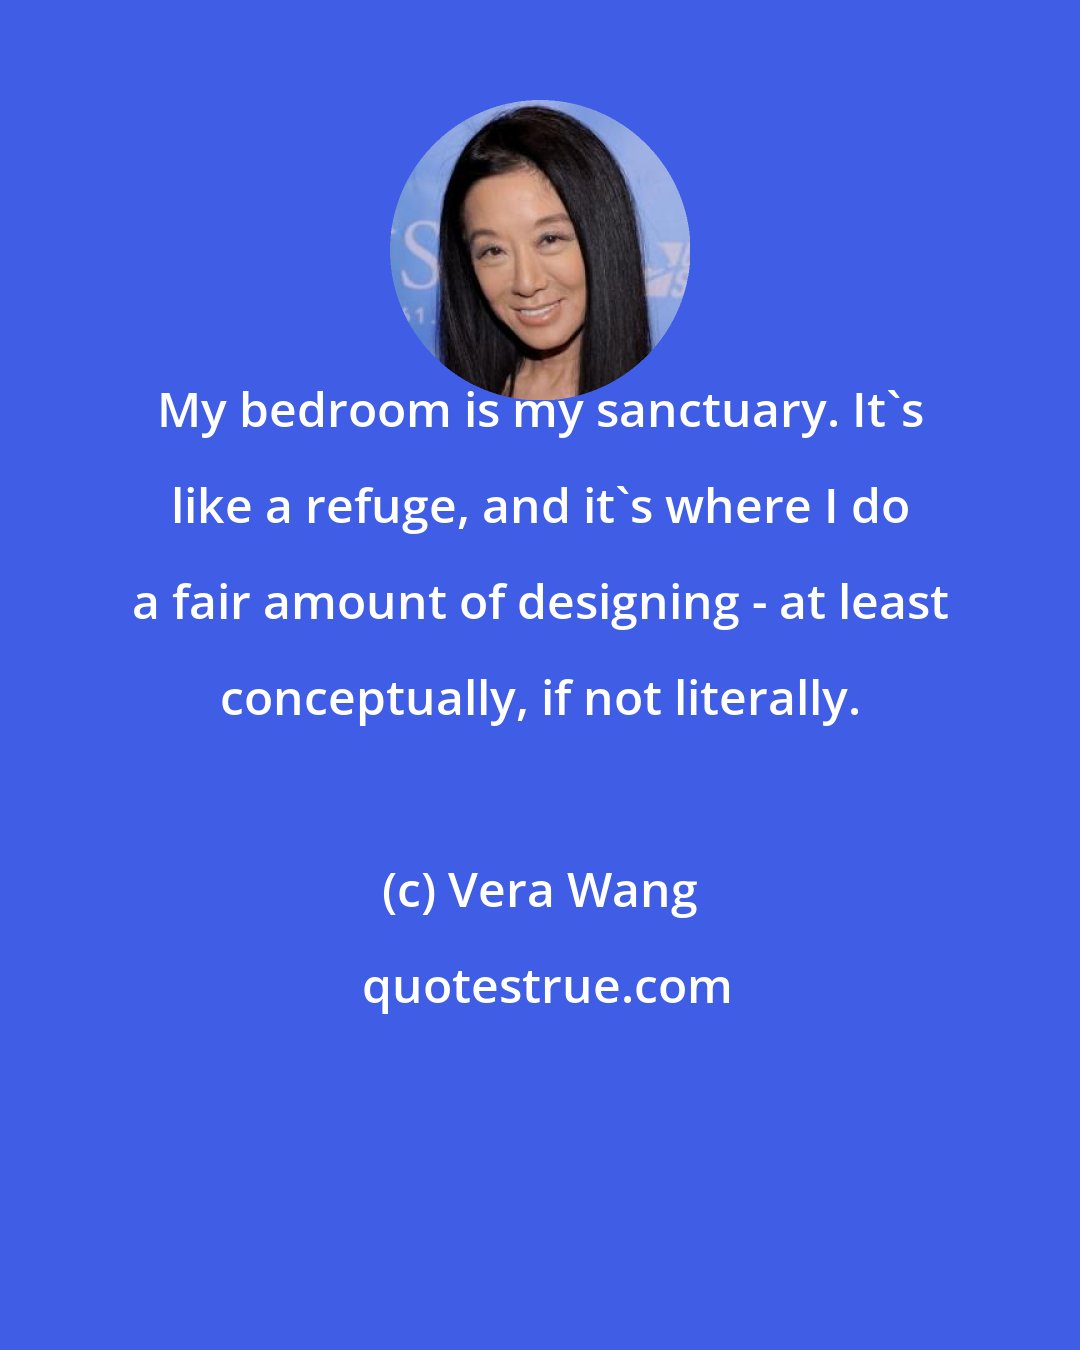 Vera Wang: My bedroom is my sanctuary. It's like a refuge, and it's where I do a fair amount of designing - at least conceptually, if not literally.